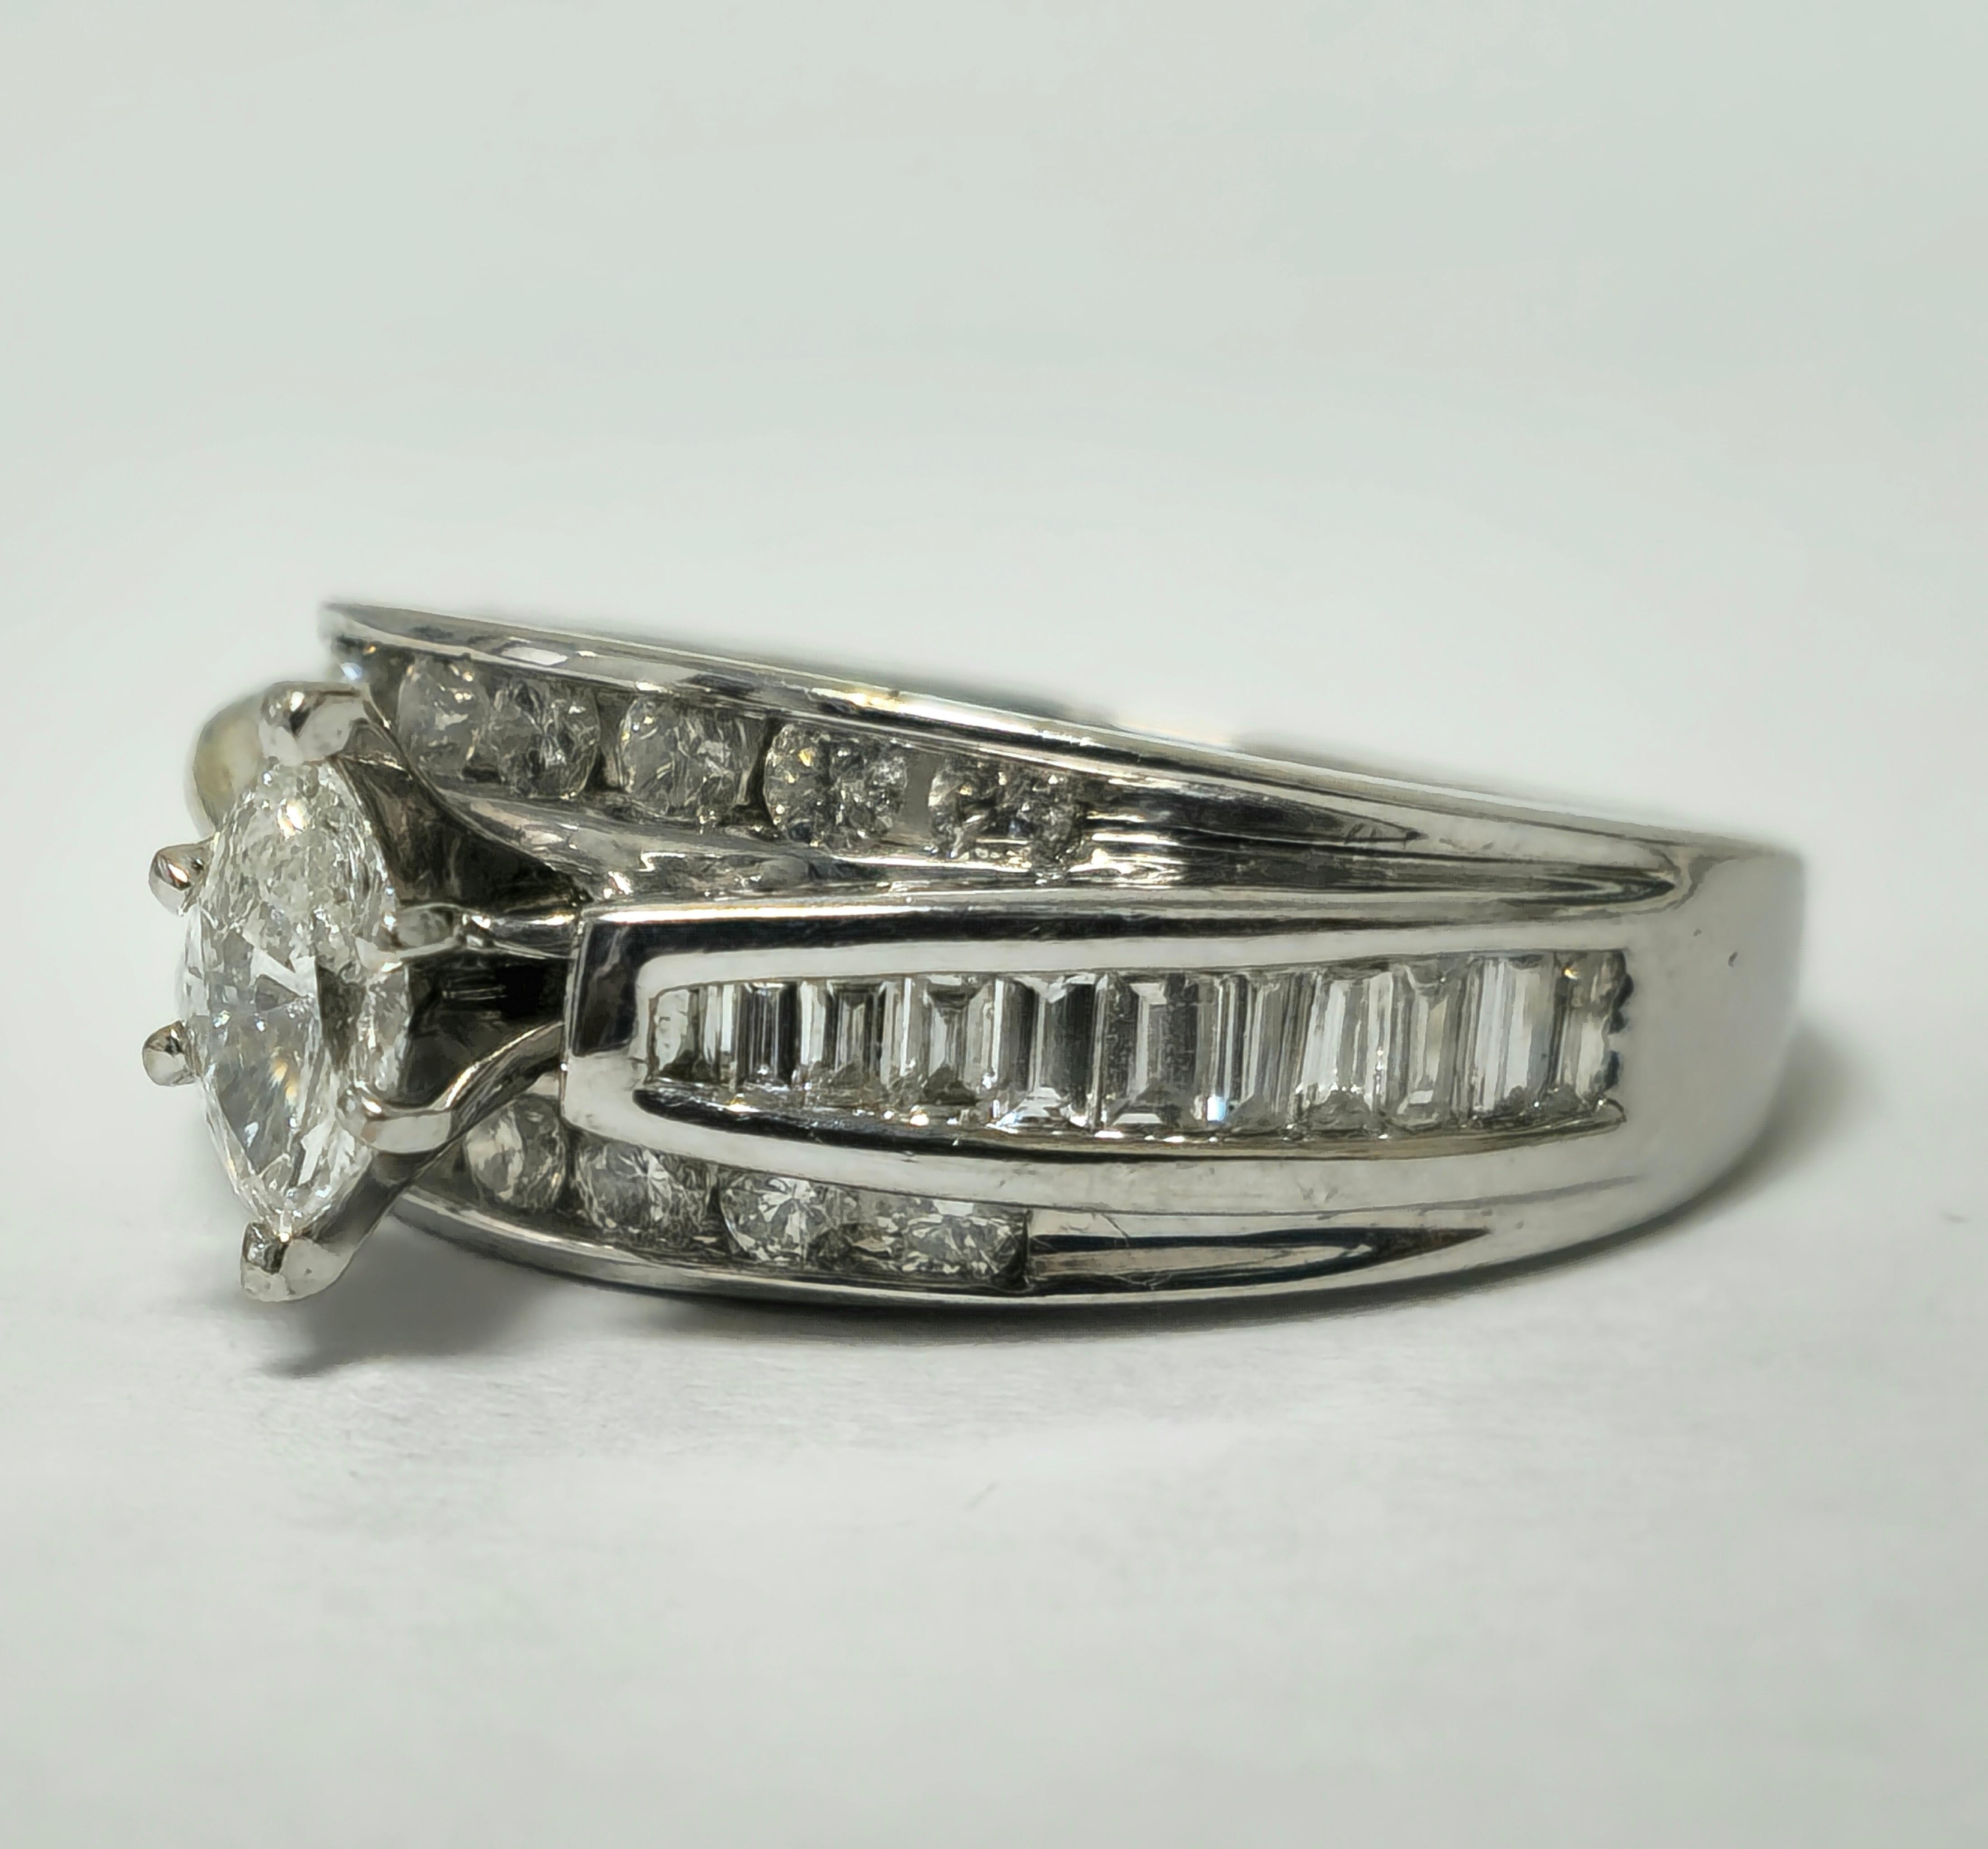 Fashioned from luxurious 14K white gold, this exquisite ring showcases a total diamond weight of 2.40 carats, featuring a splendid array of marquise, round brilliant, and baguette cuts. With diamonds of VS-SI clarity and F-G color, each stone is